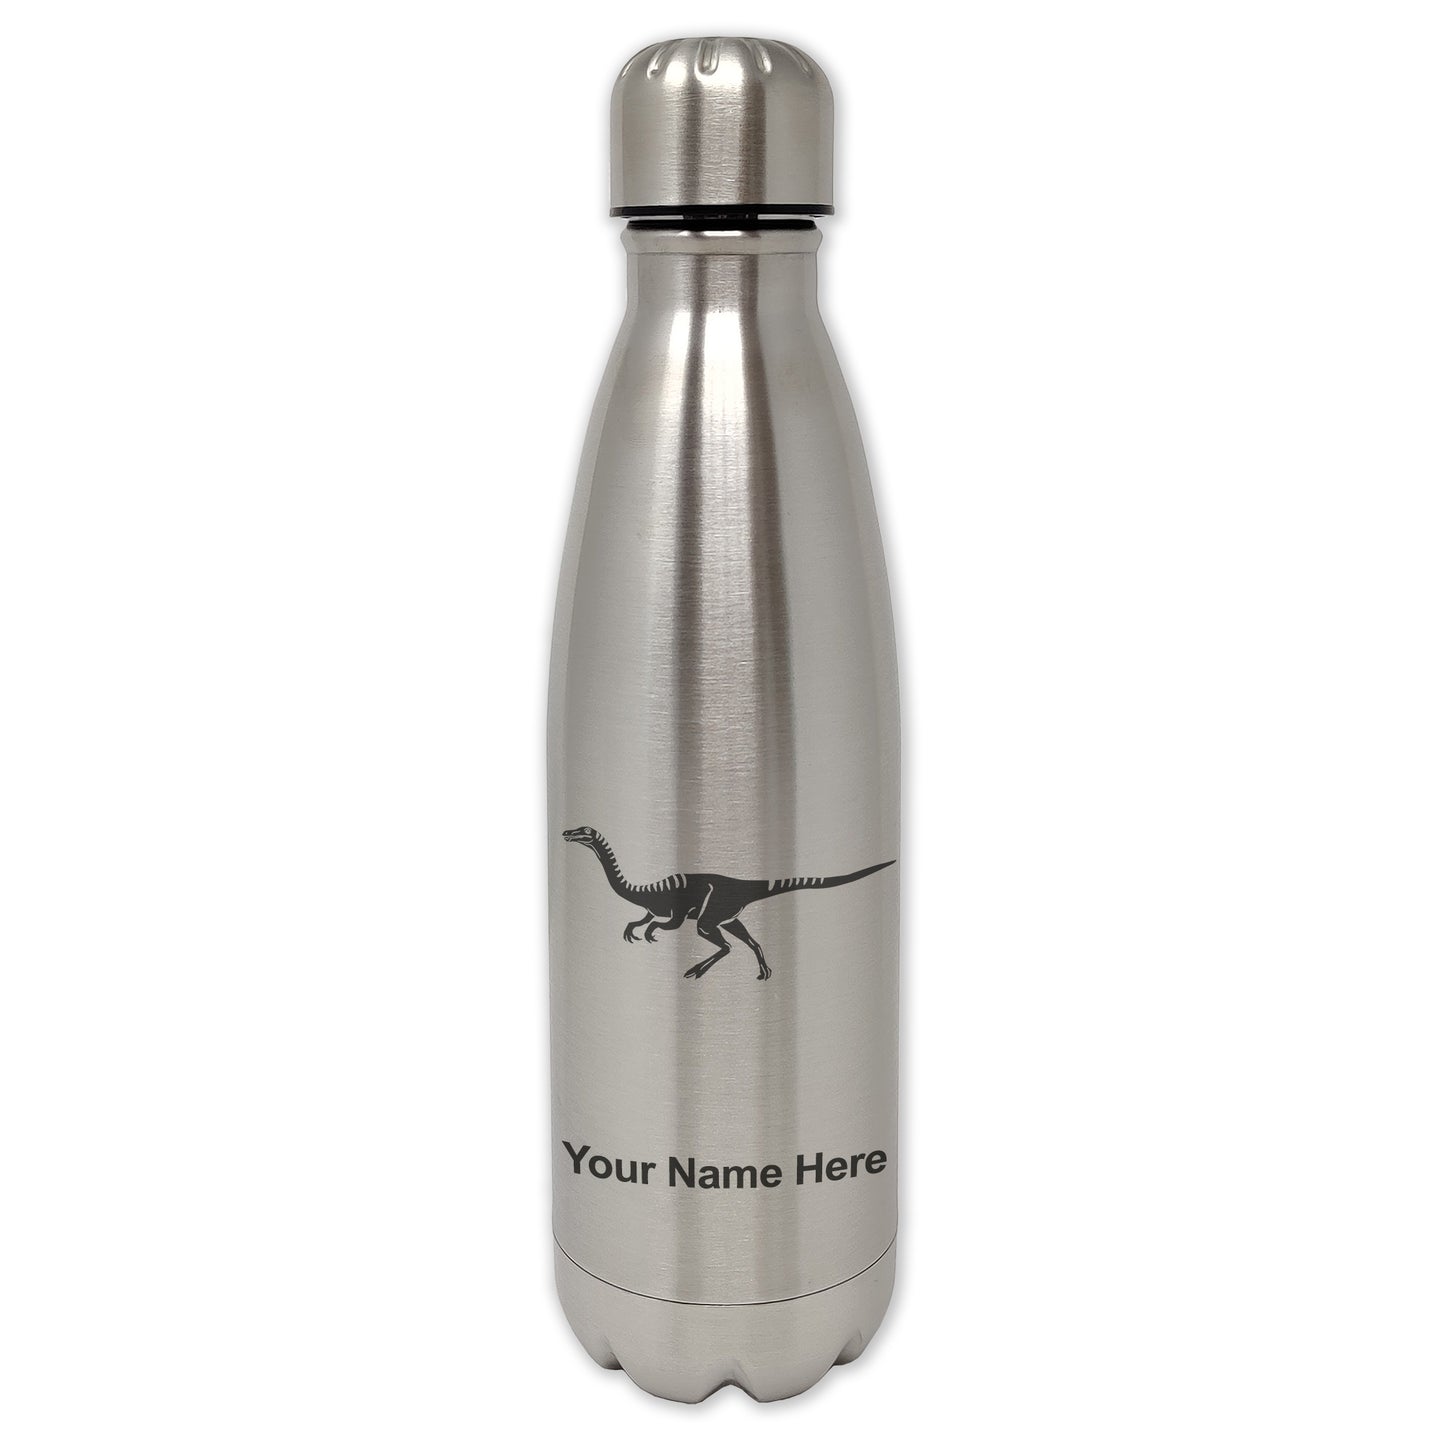 LaserGram Single Wall Water Bottle, Gallimimus Dinosaur, Personalized Engraving Included